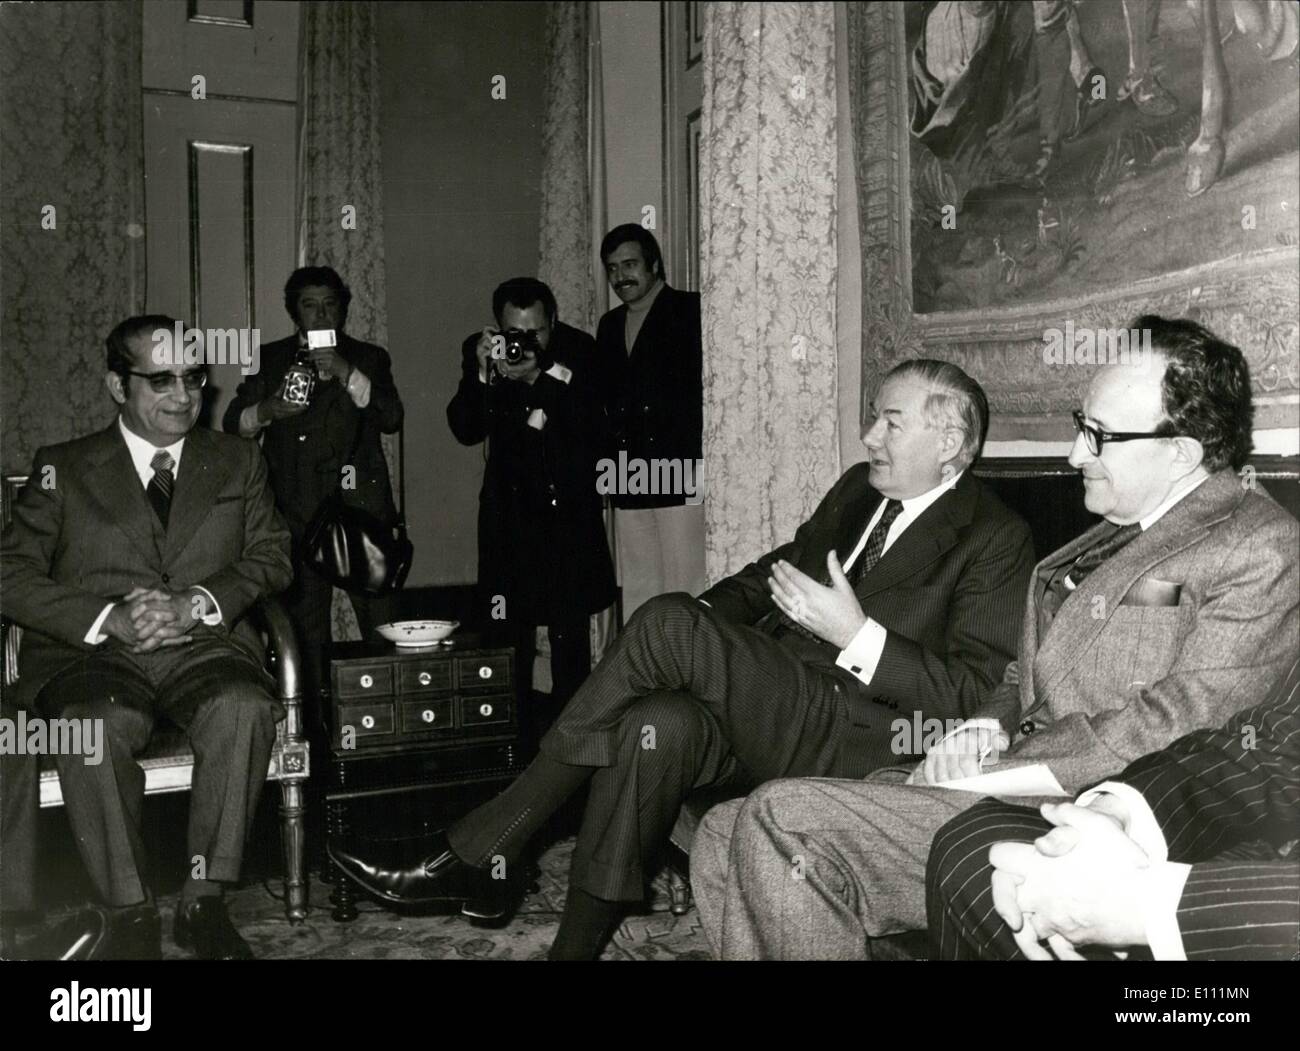 Apr. 04, 1975 - James Callaghan with the President Costa Gomes at the 12 Minister Vasco Goncalves at Lisbon. : A.E.I. Stock Photo